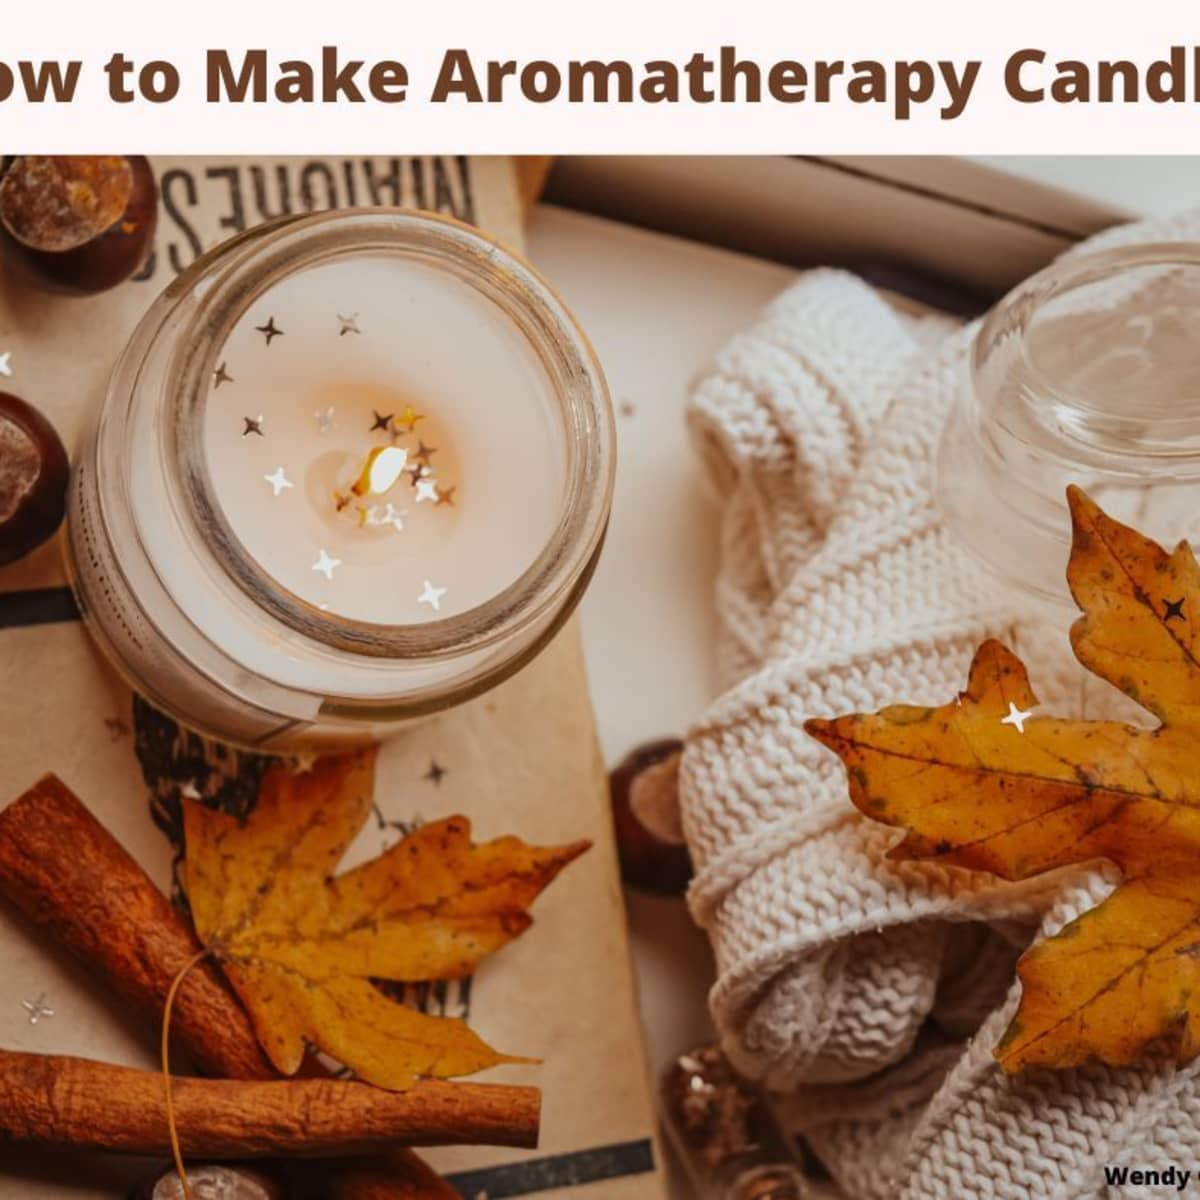 3+ Ways To Make Essential Oils Candles at Home: Guide, DIY Recipes